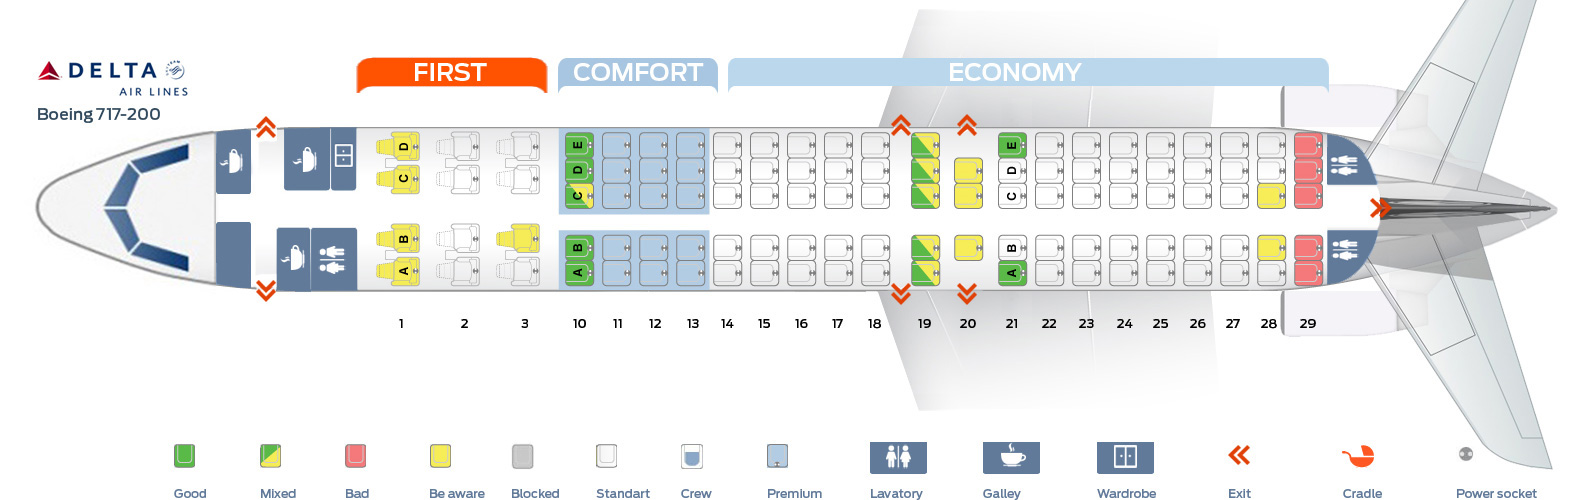 Delta First Class Seating Chart